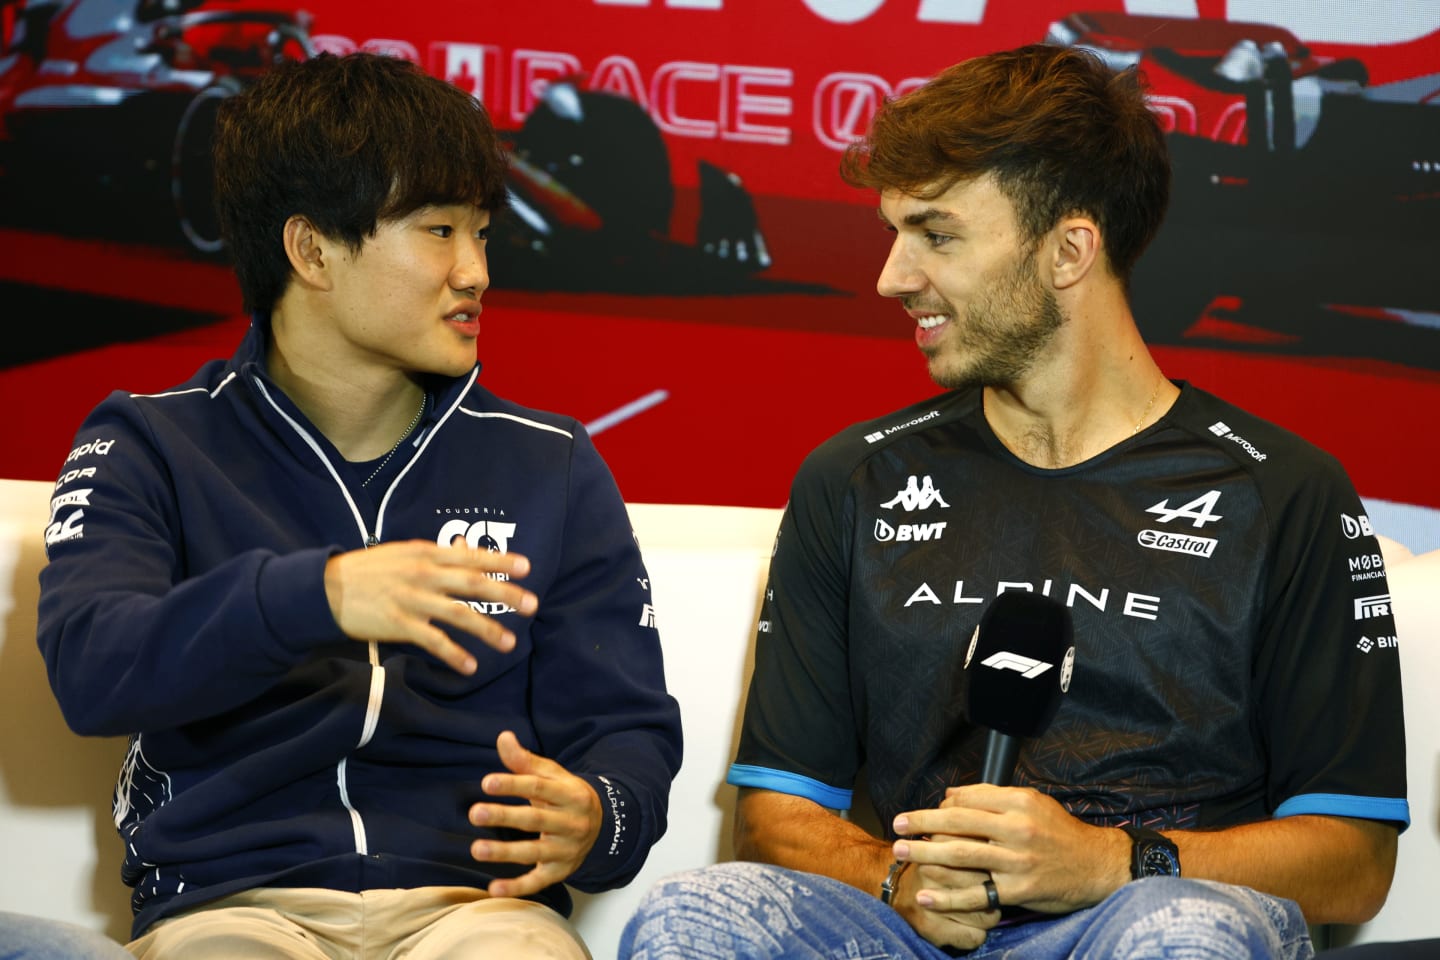 MONTREAL, QUEBEC - JUNE 15: Yuki Tsunoda of Japan and Scuderia AlphaTauri and Pierre Gasly of France and Alpine F1 talk in the Drivers Press Conference during previews ahead of the F1 Grand Prix of Canada at Circuit Gilles Villeneuve on June 15, 2023 in Montreal, Quebec. (Photo by Jared C. Tilton/Getty Images)